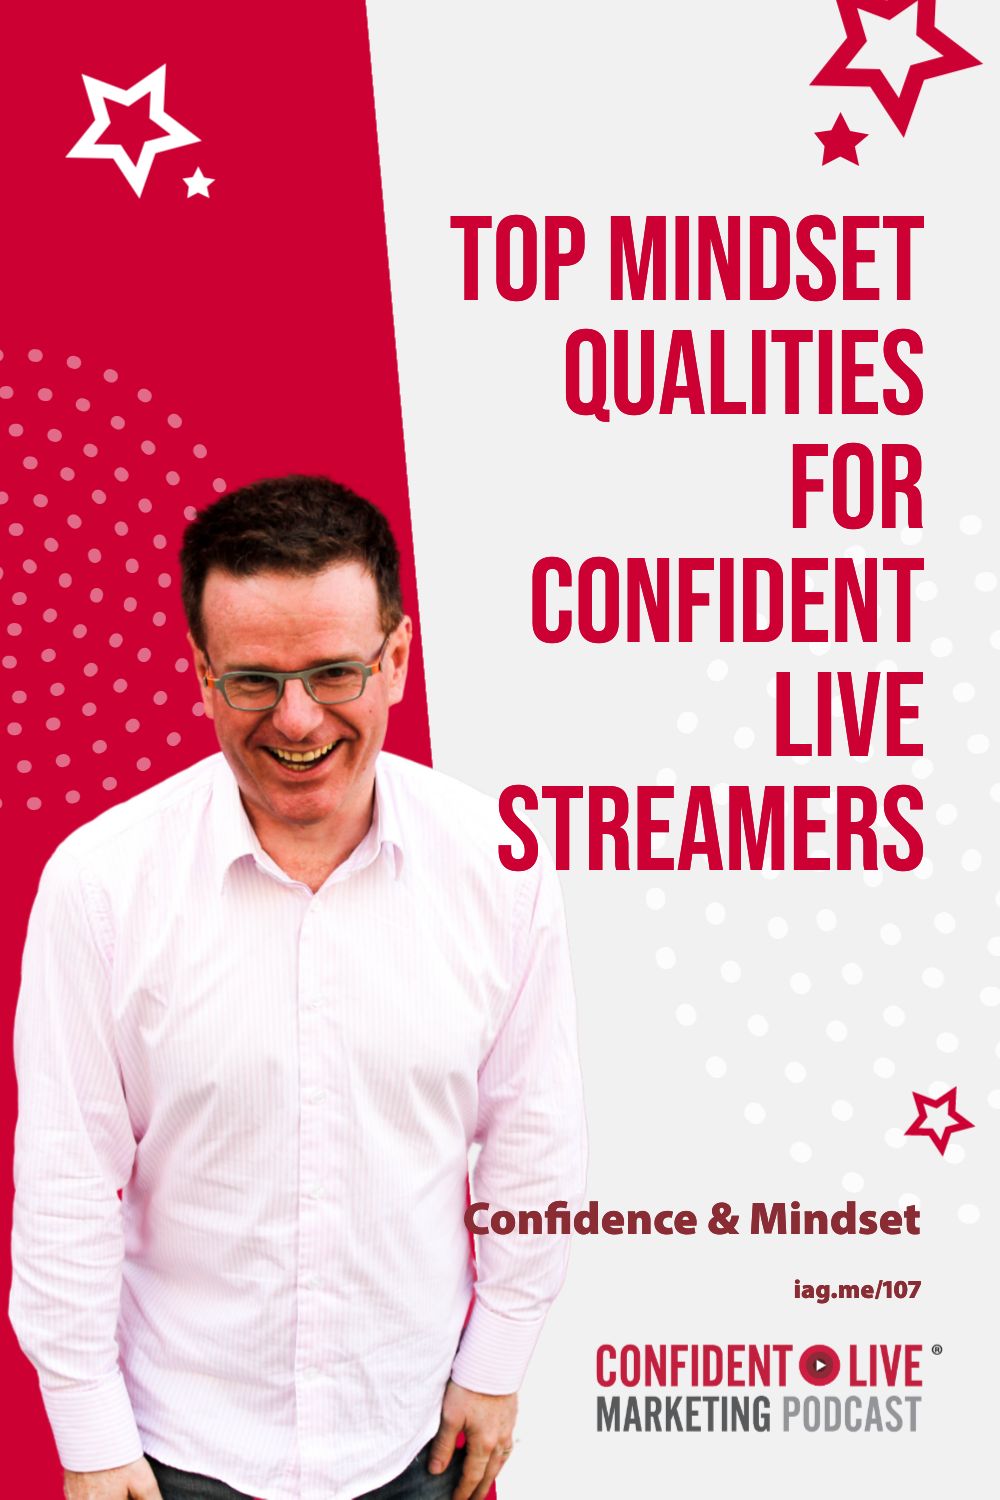 The Top Mindset Qualities That You Need For A Confident Live Show...